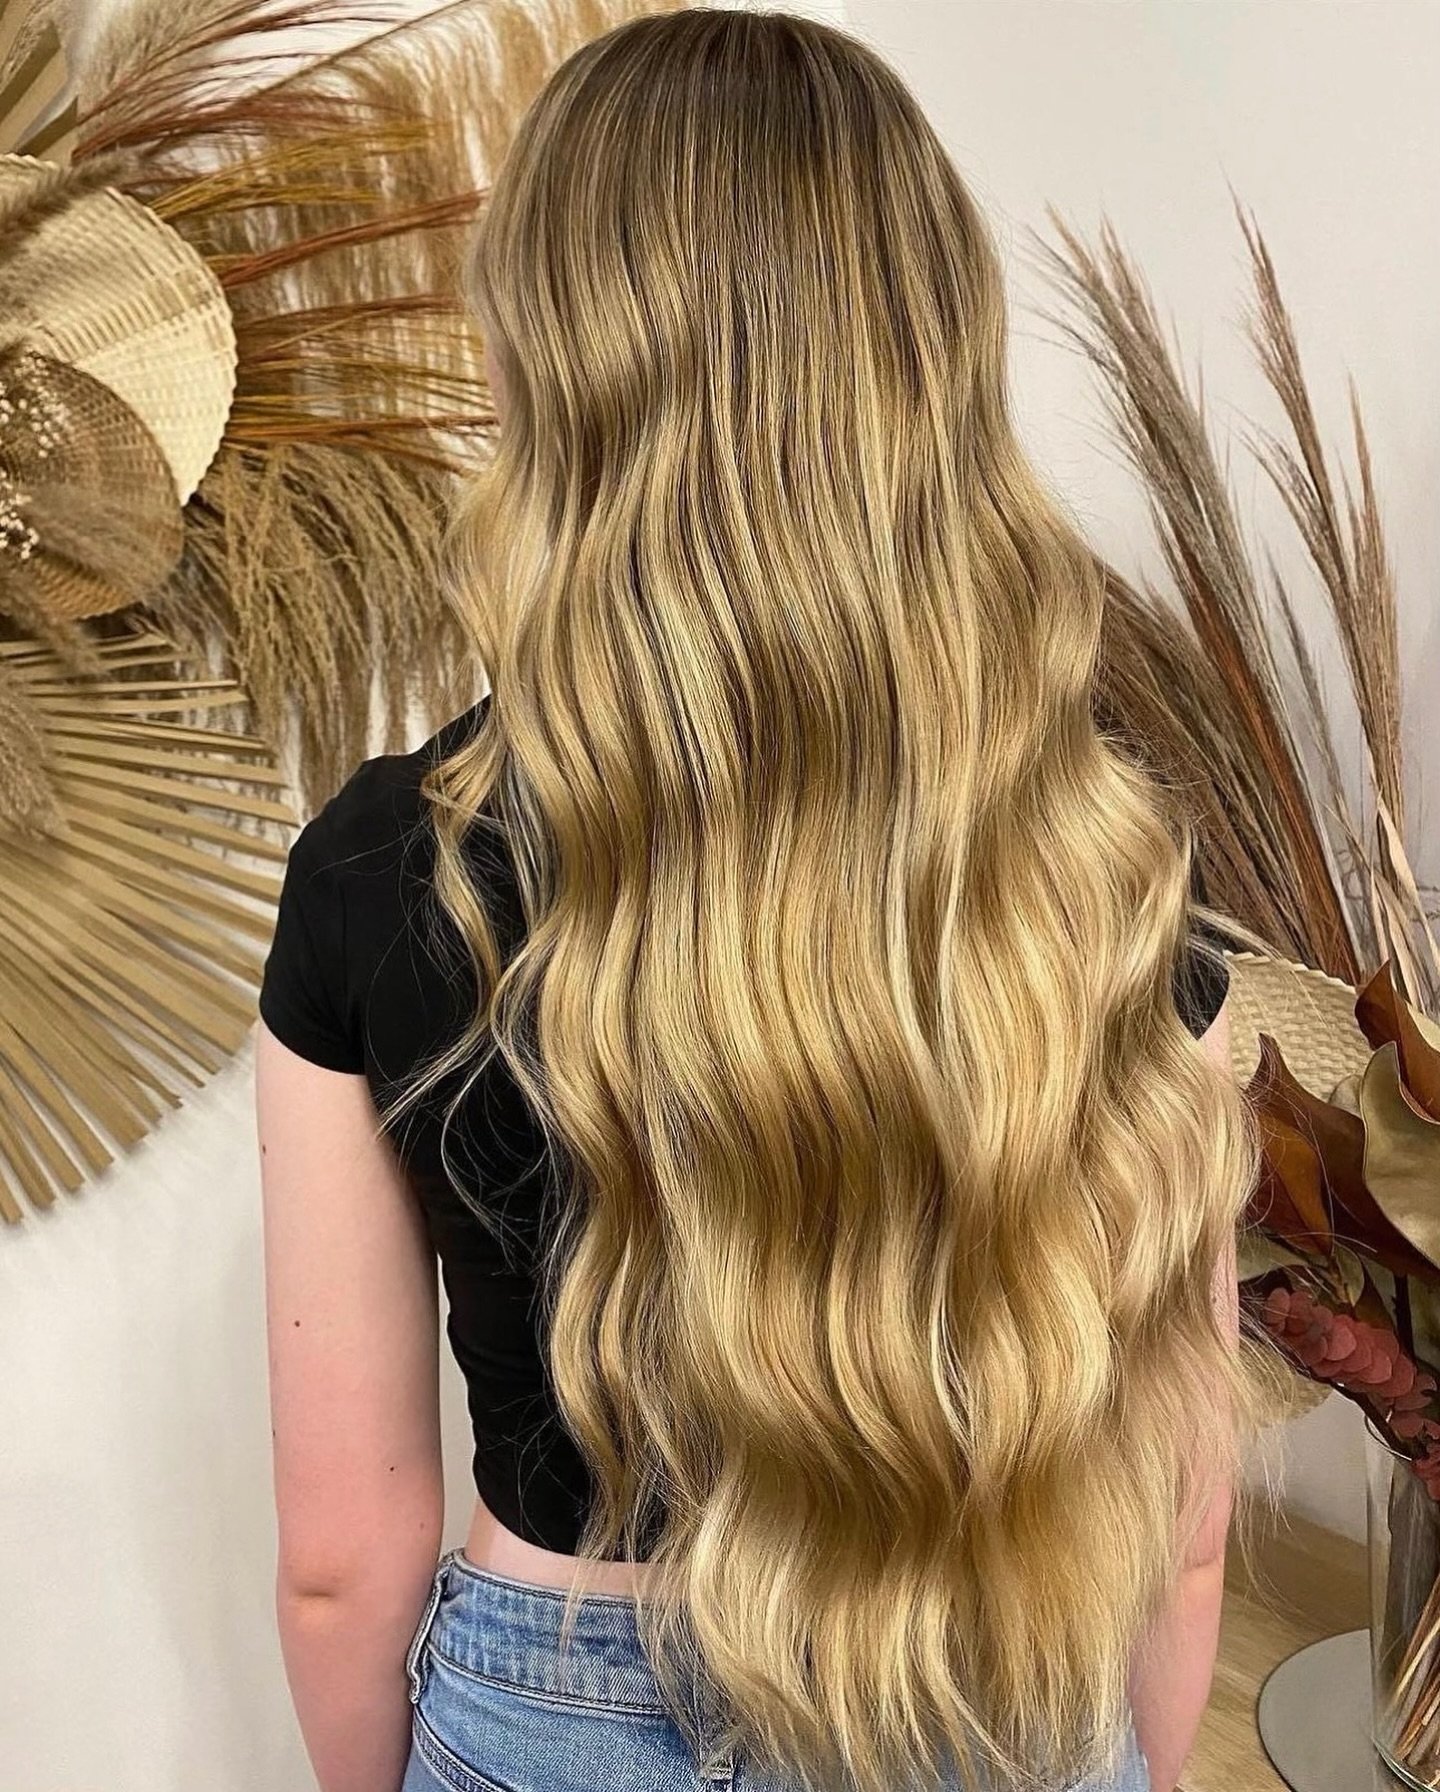 Sure! Here&rsquo;s your Instagram post with emojis and localized hashtags:

&mdash;

&ldquo;Want to know the secret to get this hair&hellip; ✨💁&zwj;♀️ Book an appointment with Nancy!

1. **Trim Regularly**: ✂️ Although it might seem counterintuitive